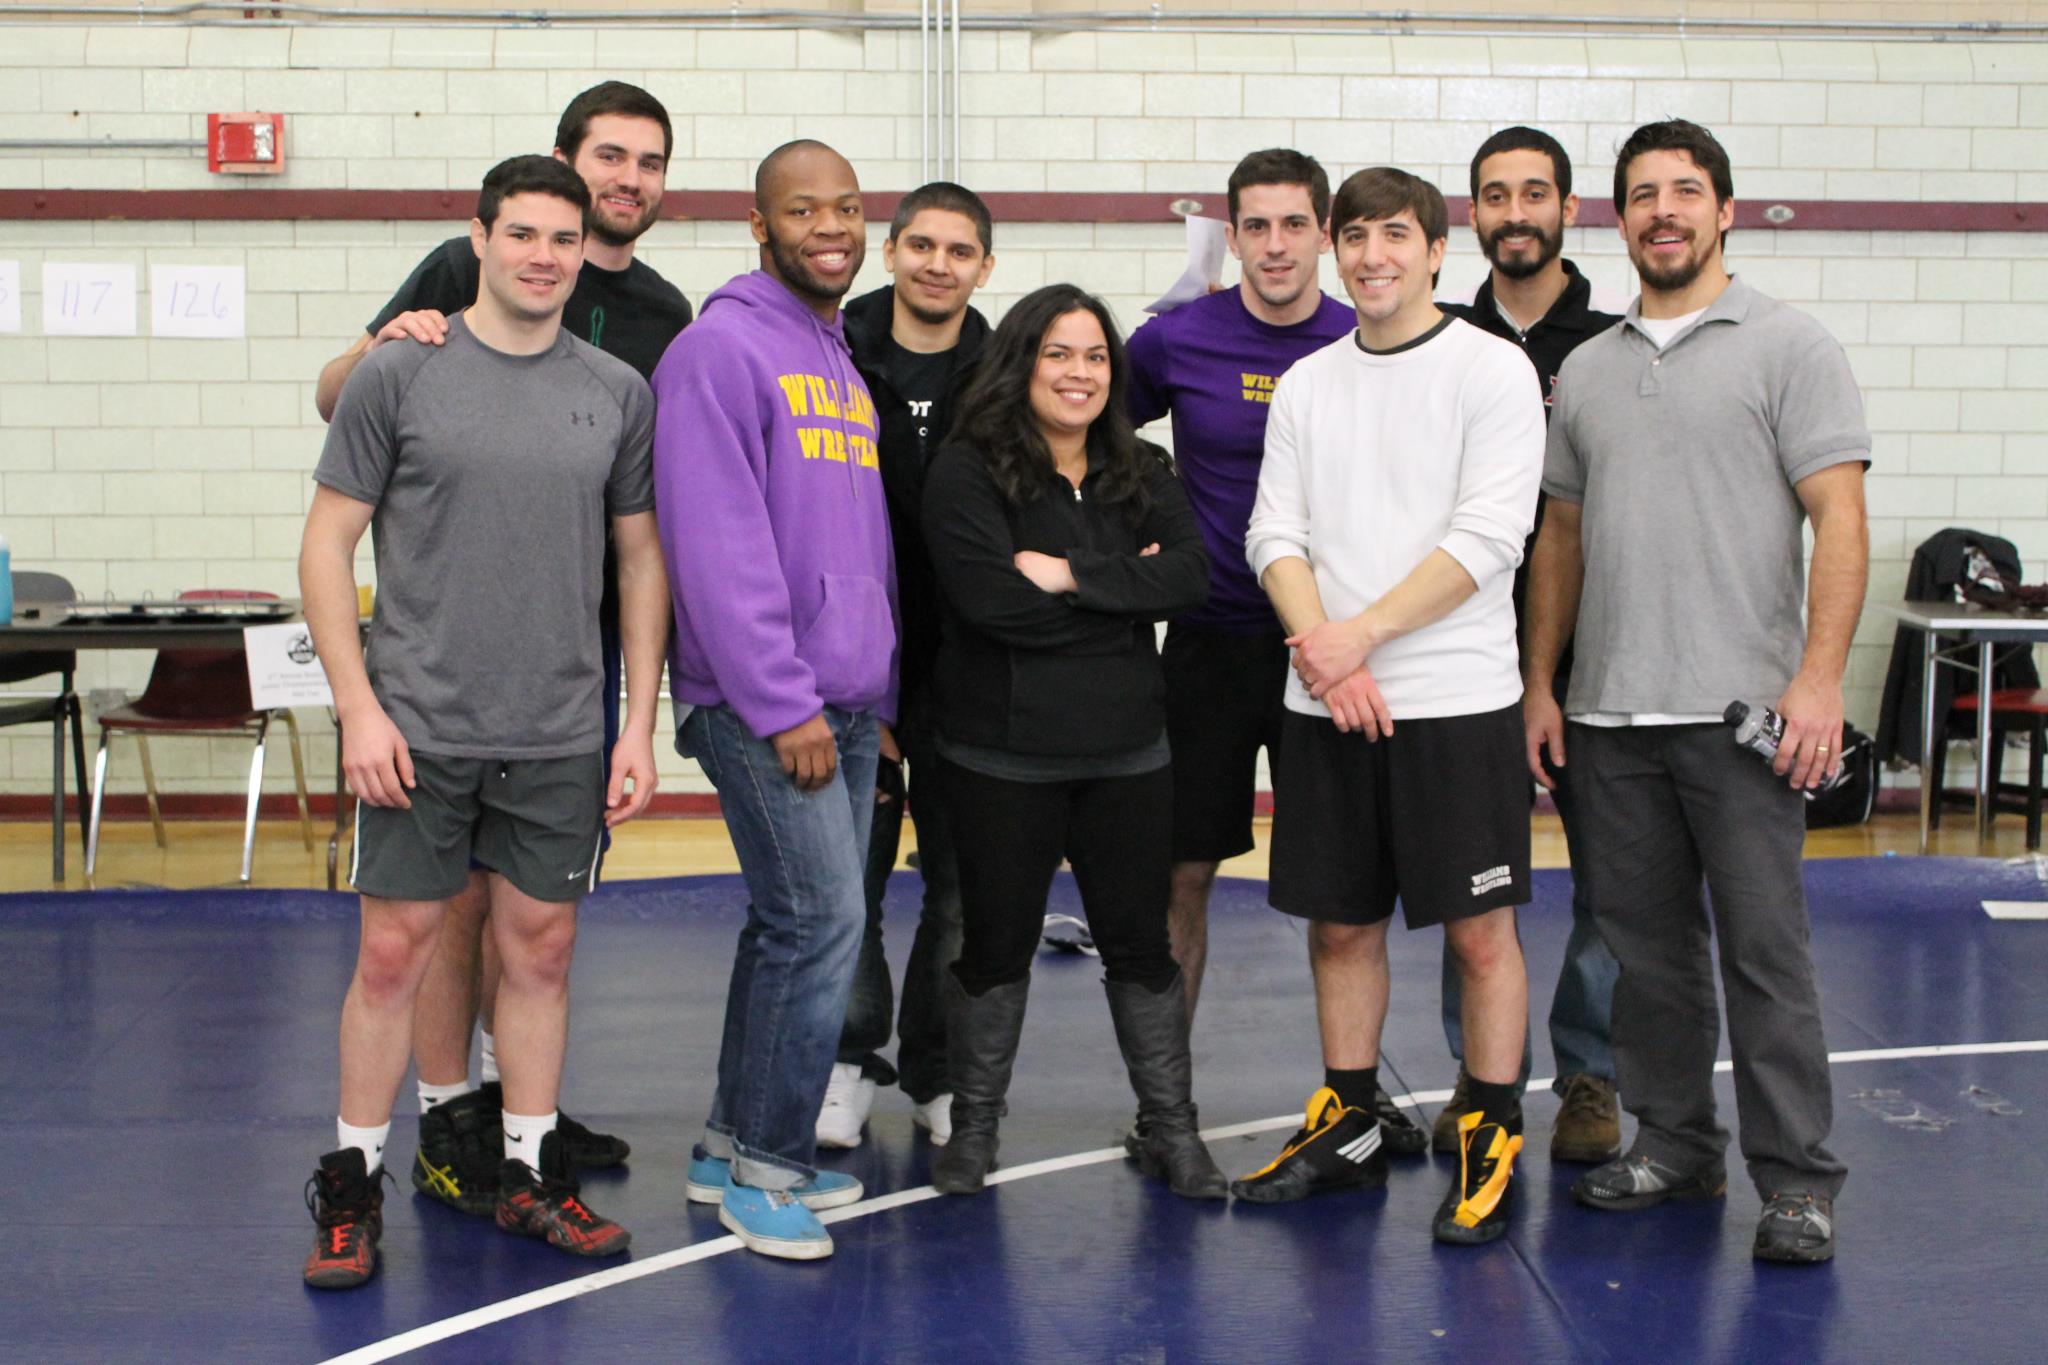 Bior (pictured here in middle) with volunteers, board members, and coaches at the conclusion of the Boston City Championships on January 20, 2013 at TechBoston Academy (Dorchester).